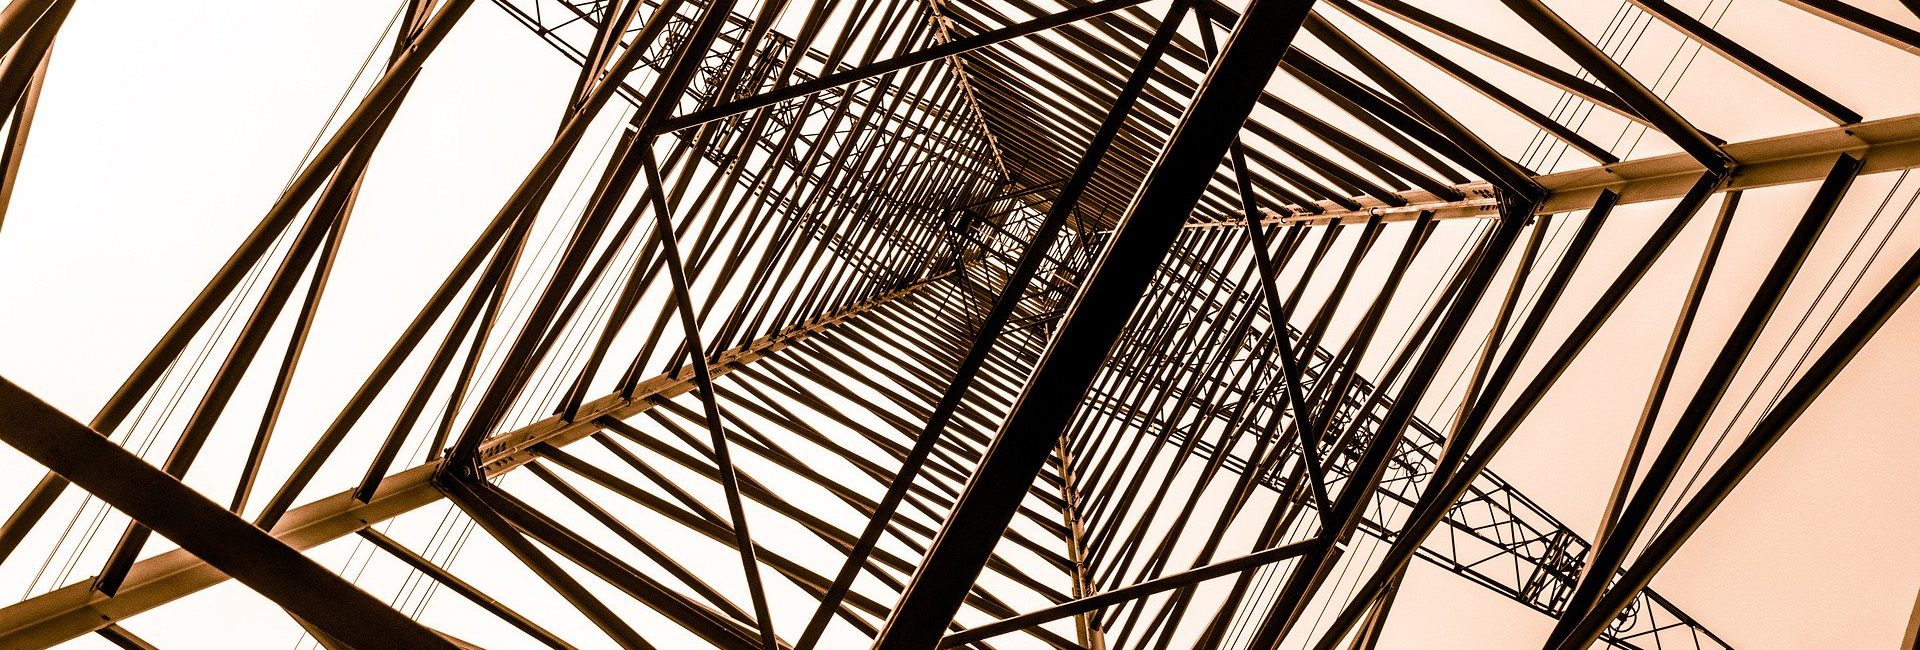 photo of the skeleton of a skyscraper against the sky looking up from the ground floor